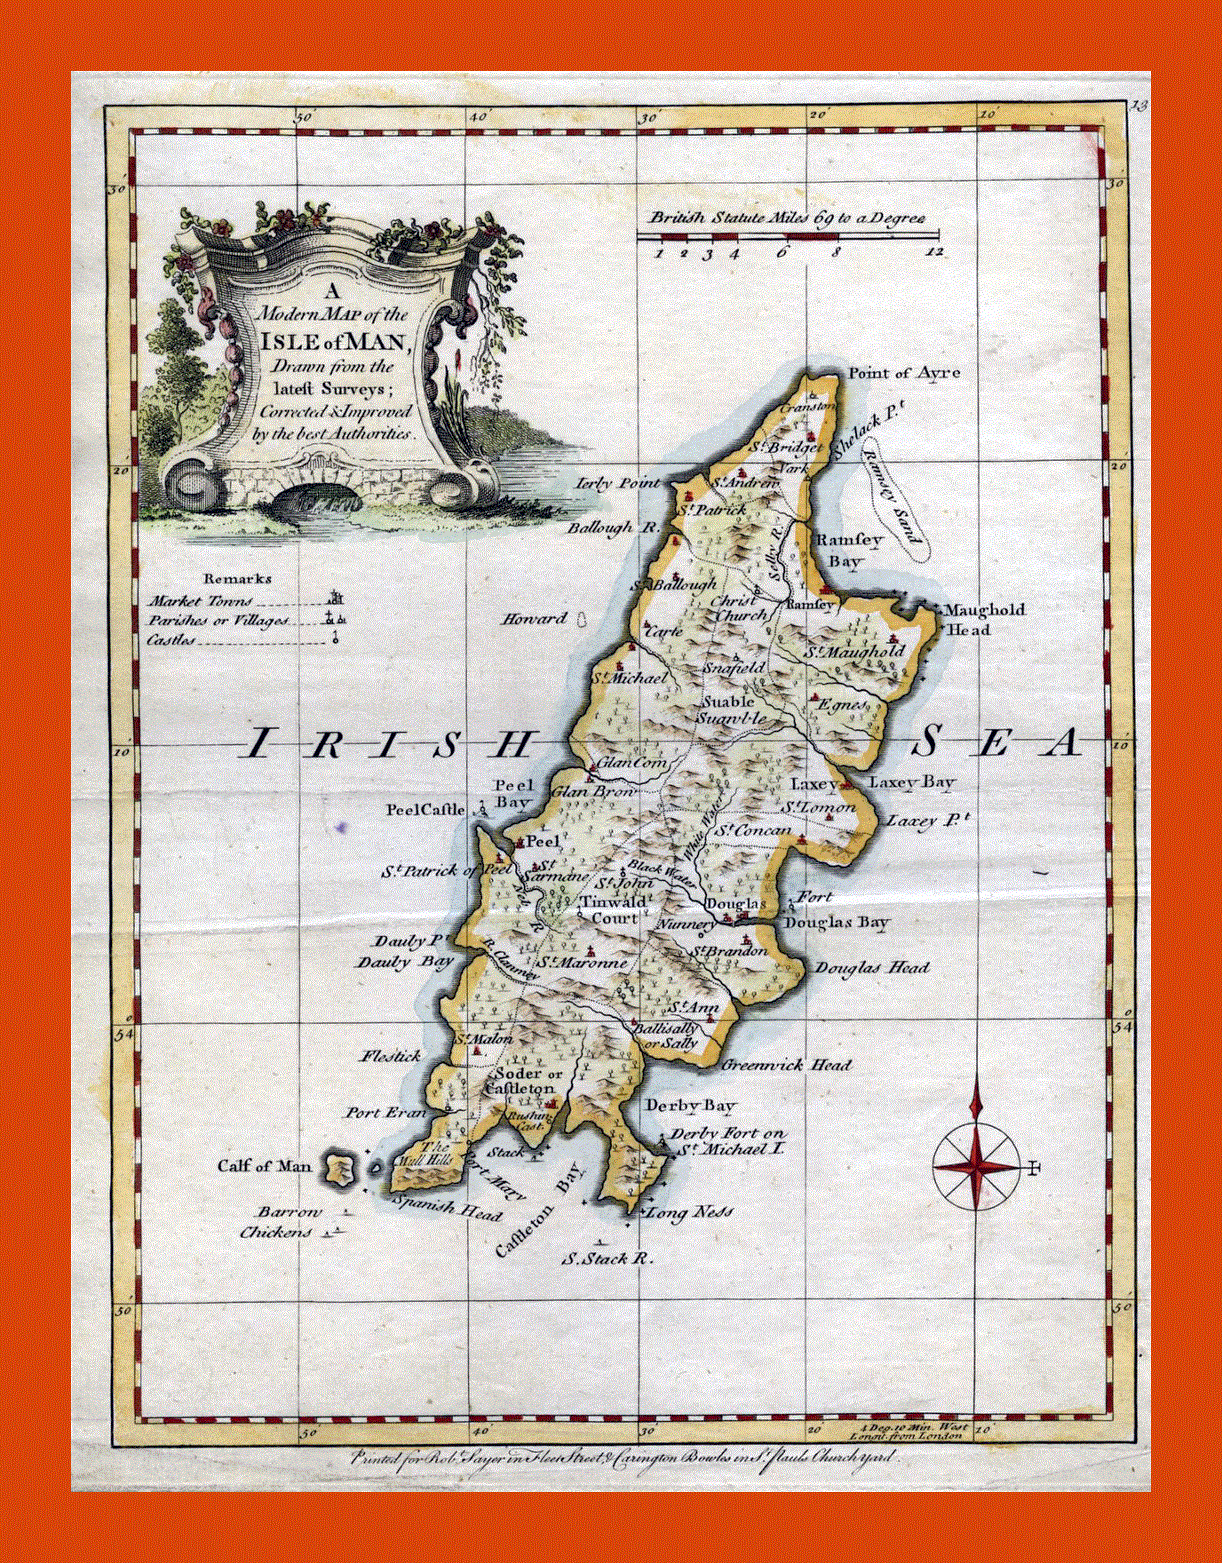 Old map of Isle of Man